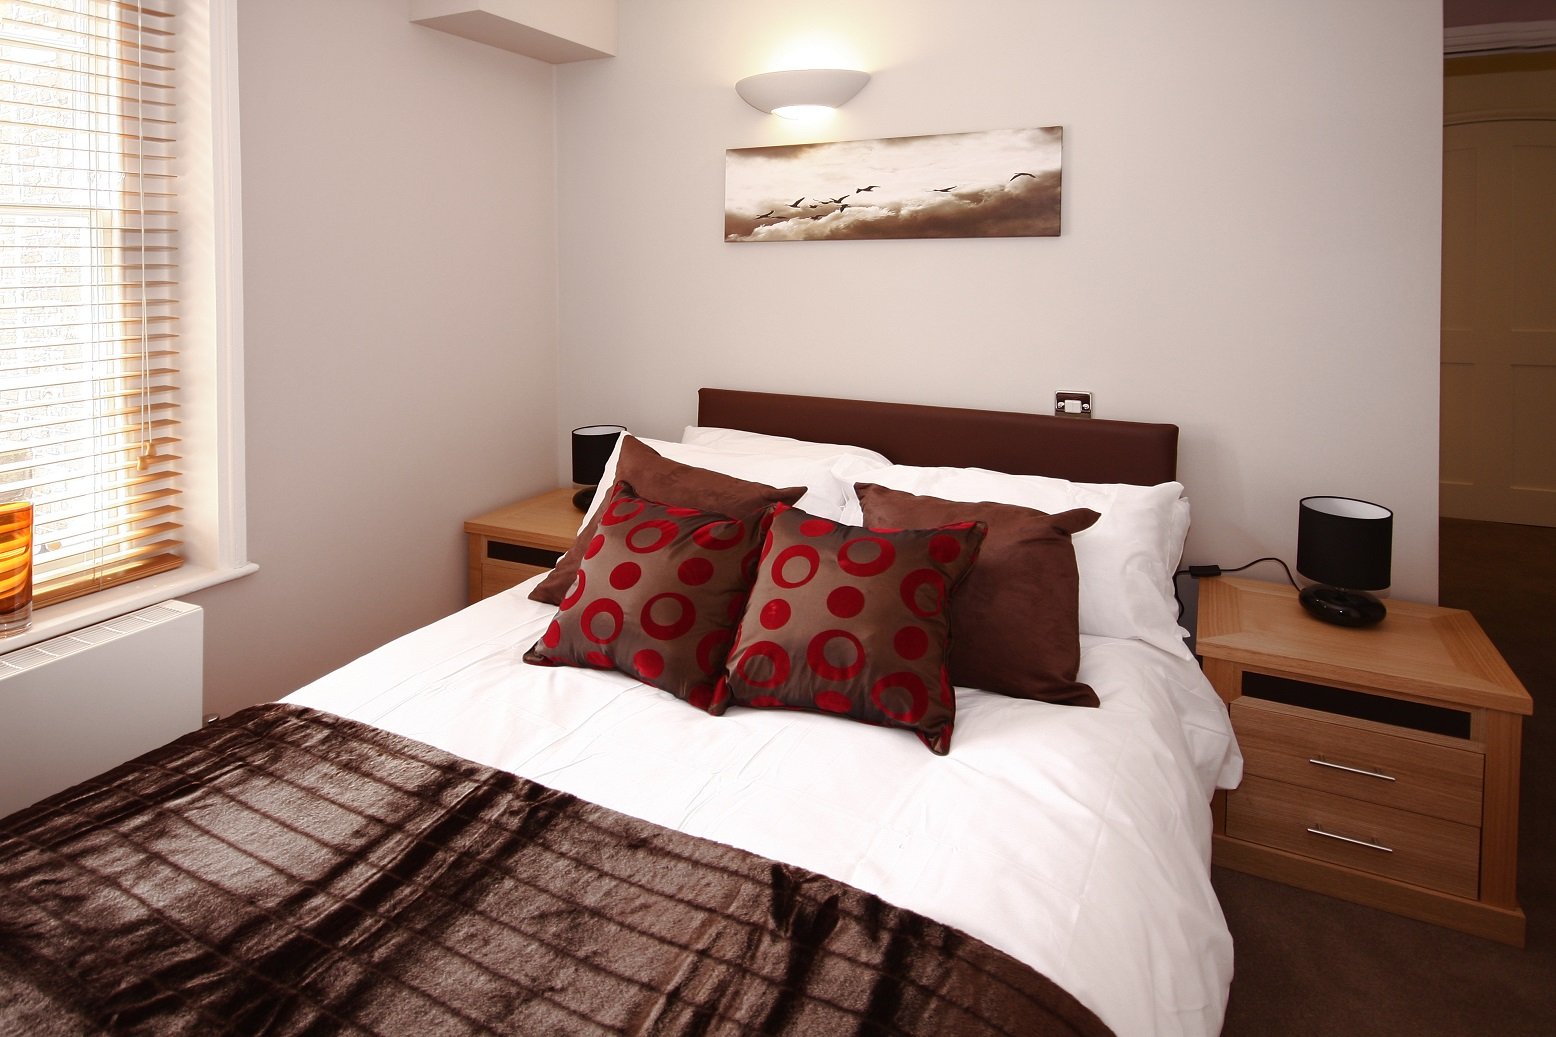 Wokingham-Serviced-Apartments,-Berkshire,-UK---Montague-House-available-now!-Book-Luxurious-Apartments-with-complimentary-housekeeping-&-On-site-Parking